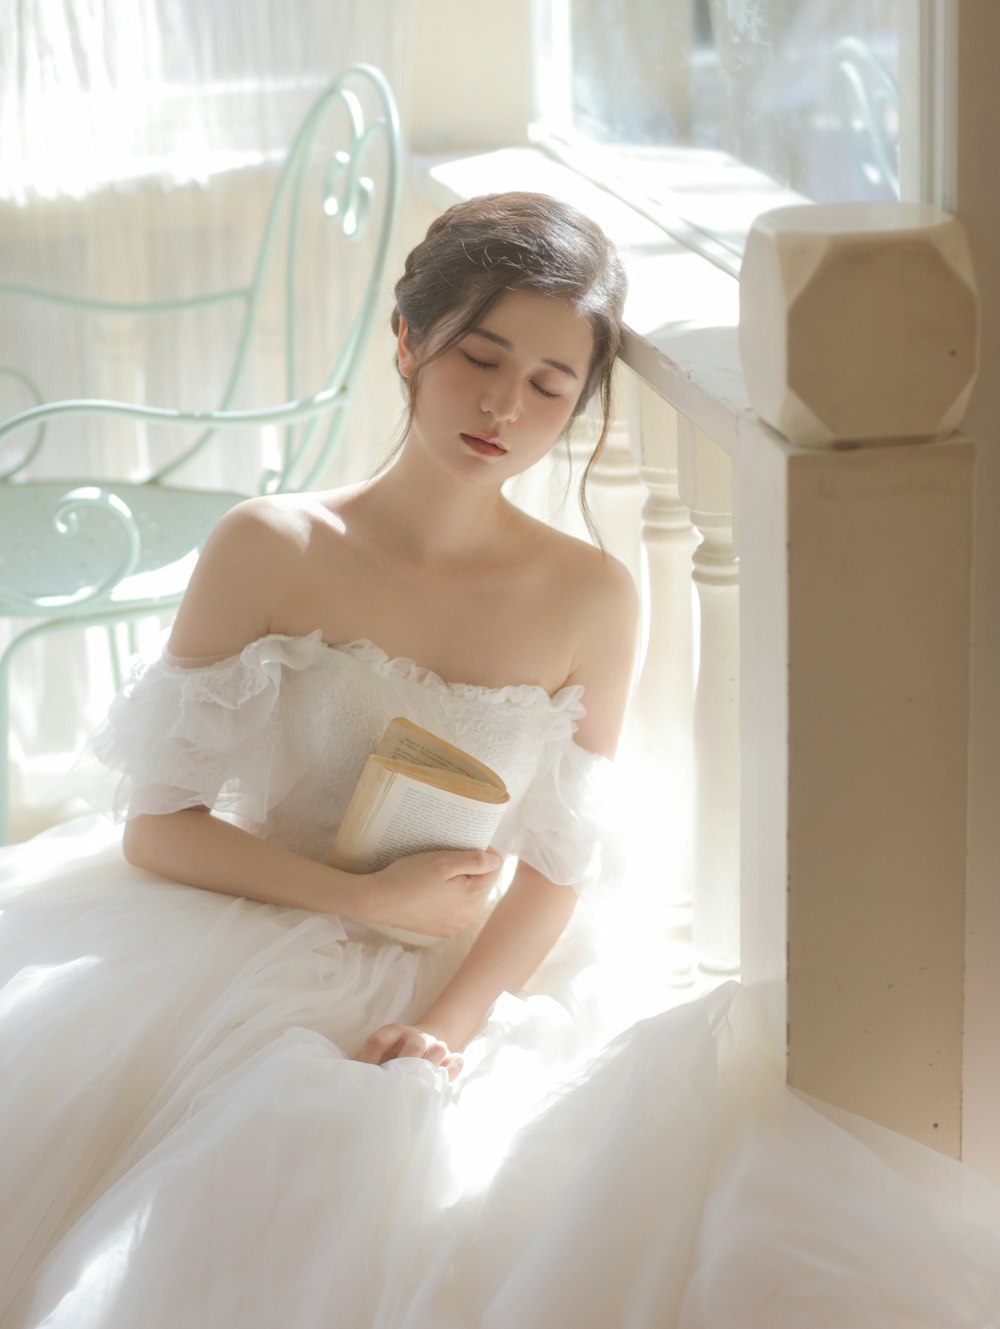 a woman in a white dress holding a book